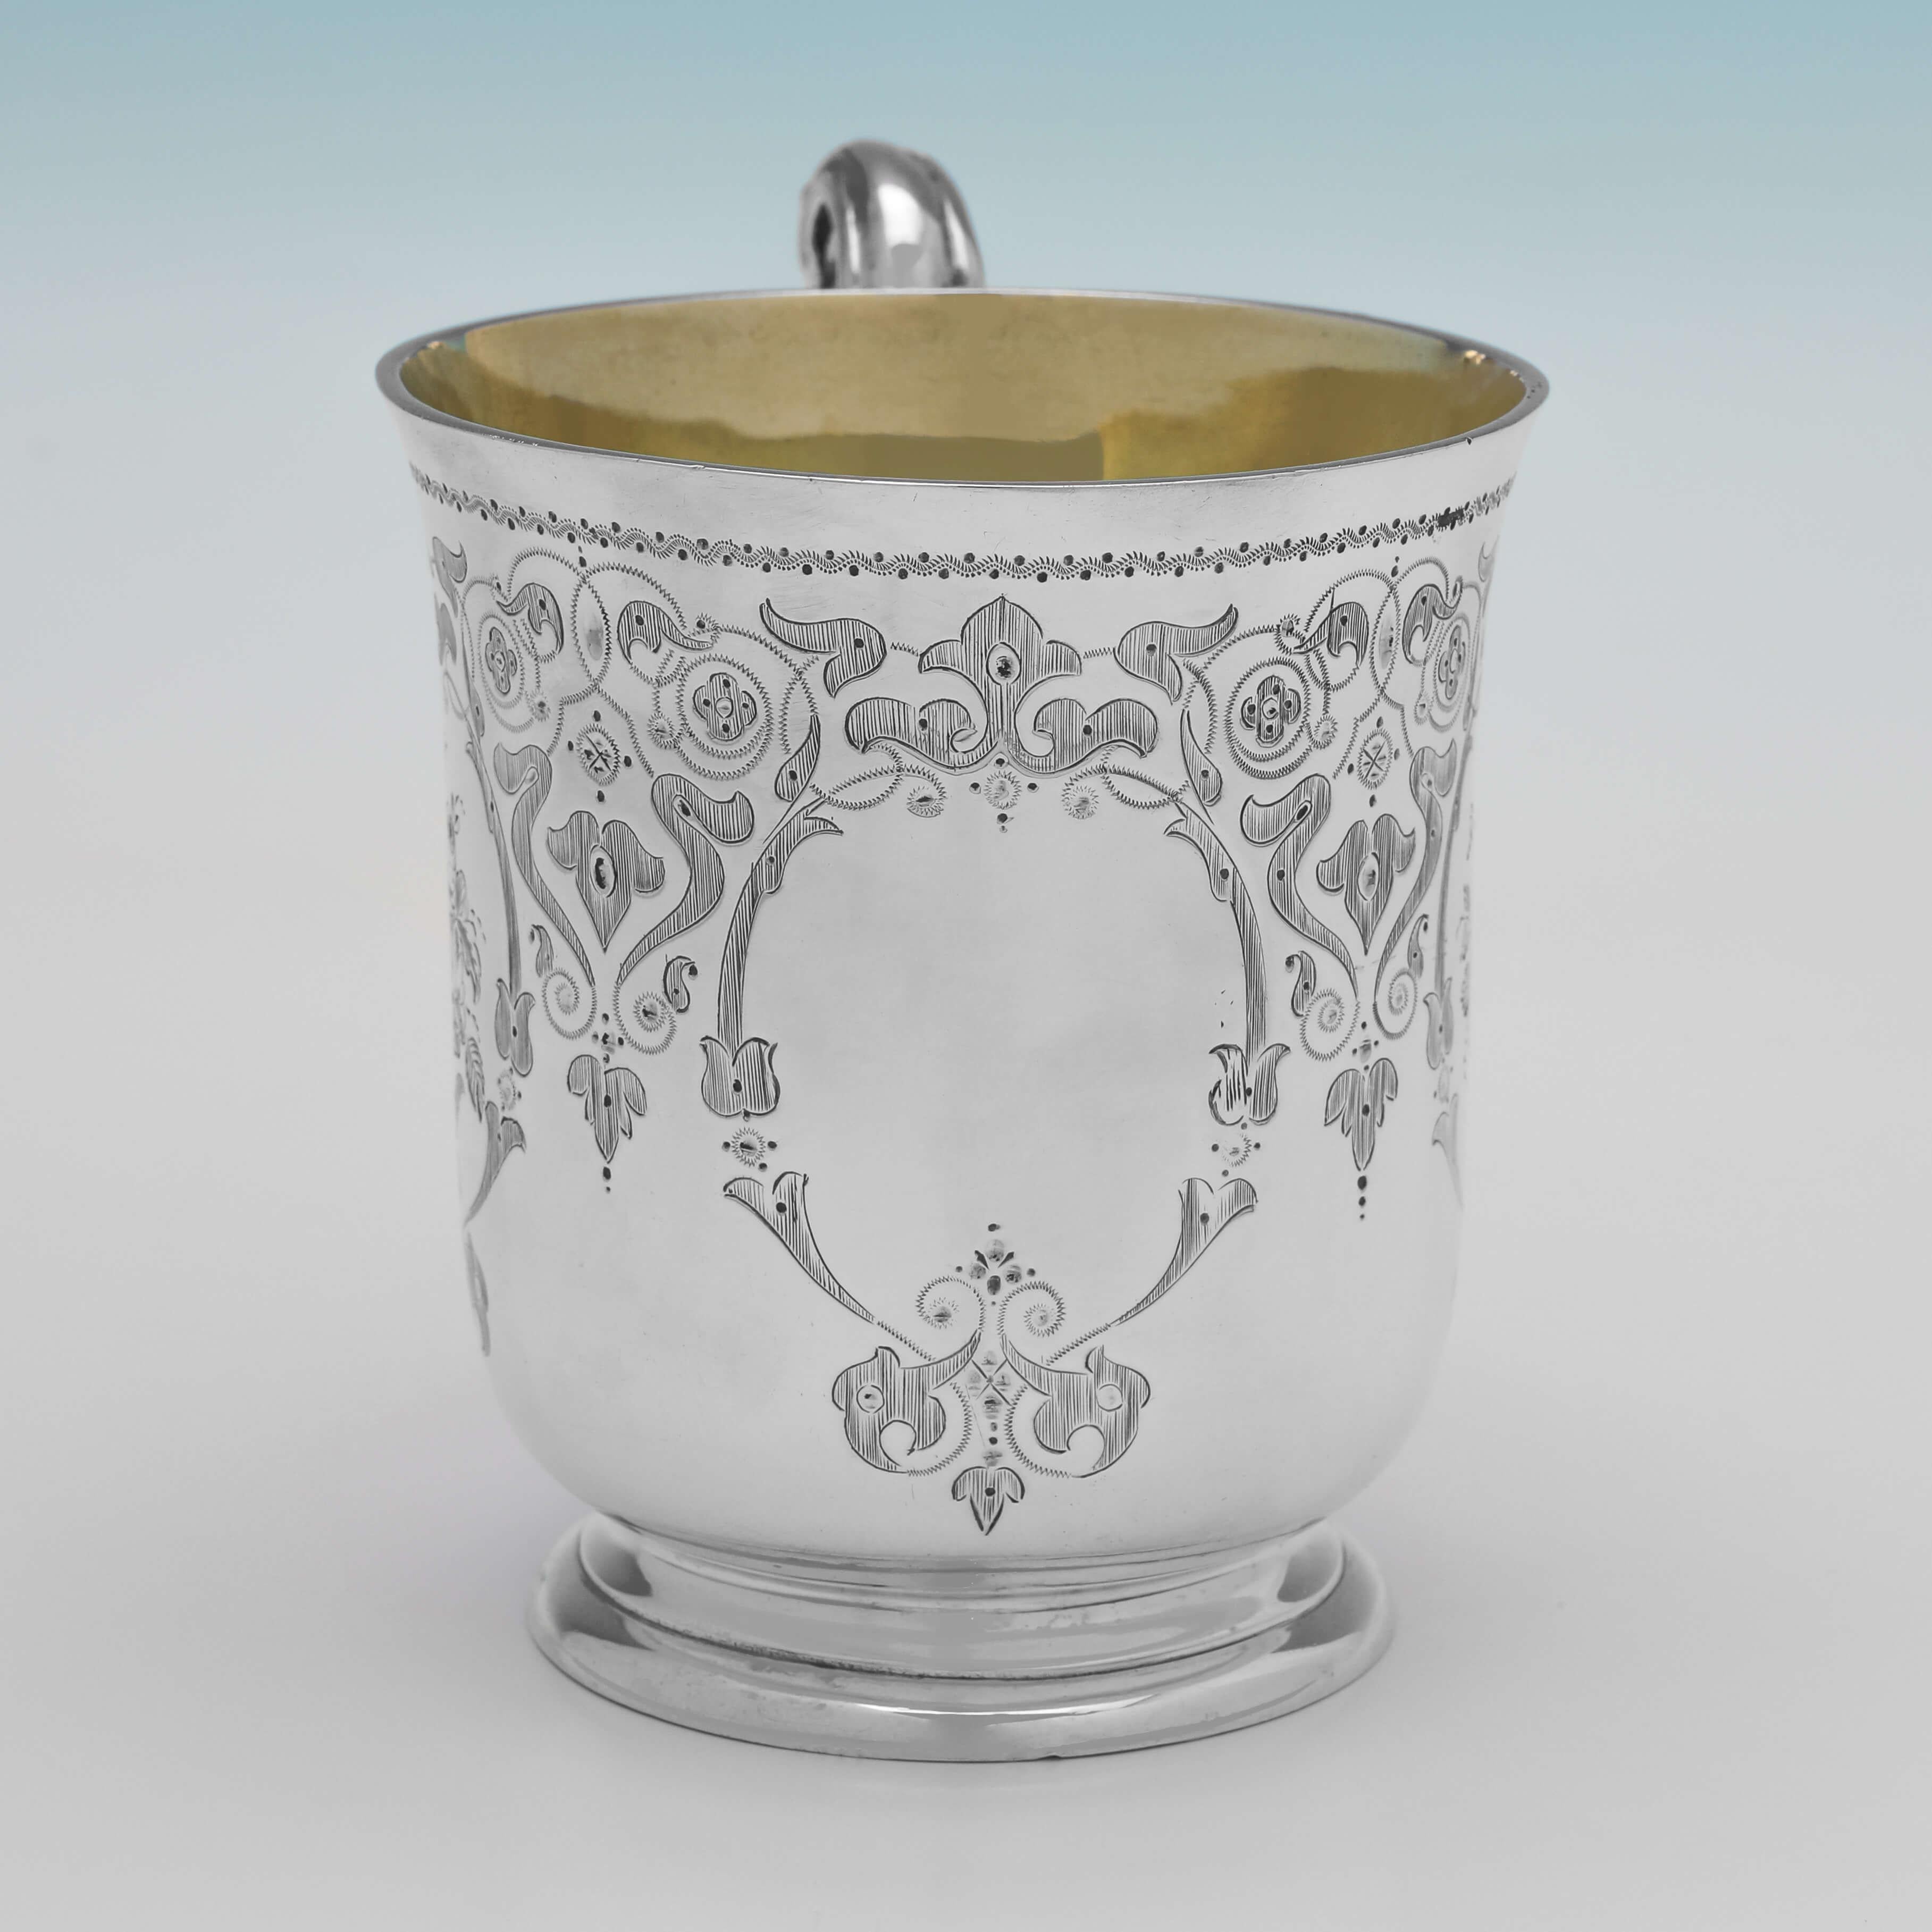 Hallmarked in London in 1863 by Edward Ker Reid, this attractive, Victorian, Antique Sterling Silver Christening Mug, features a cast ornate handle, a gilt interior, and striking engraving to the body. 

The Christening Mug measures 4